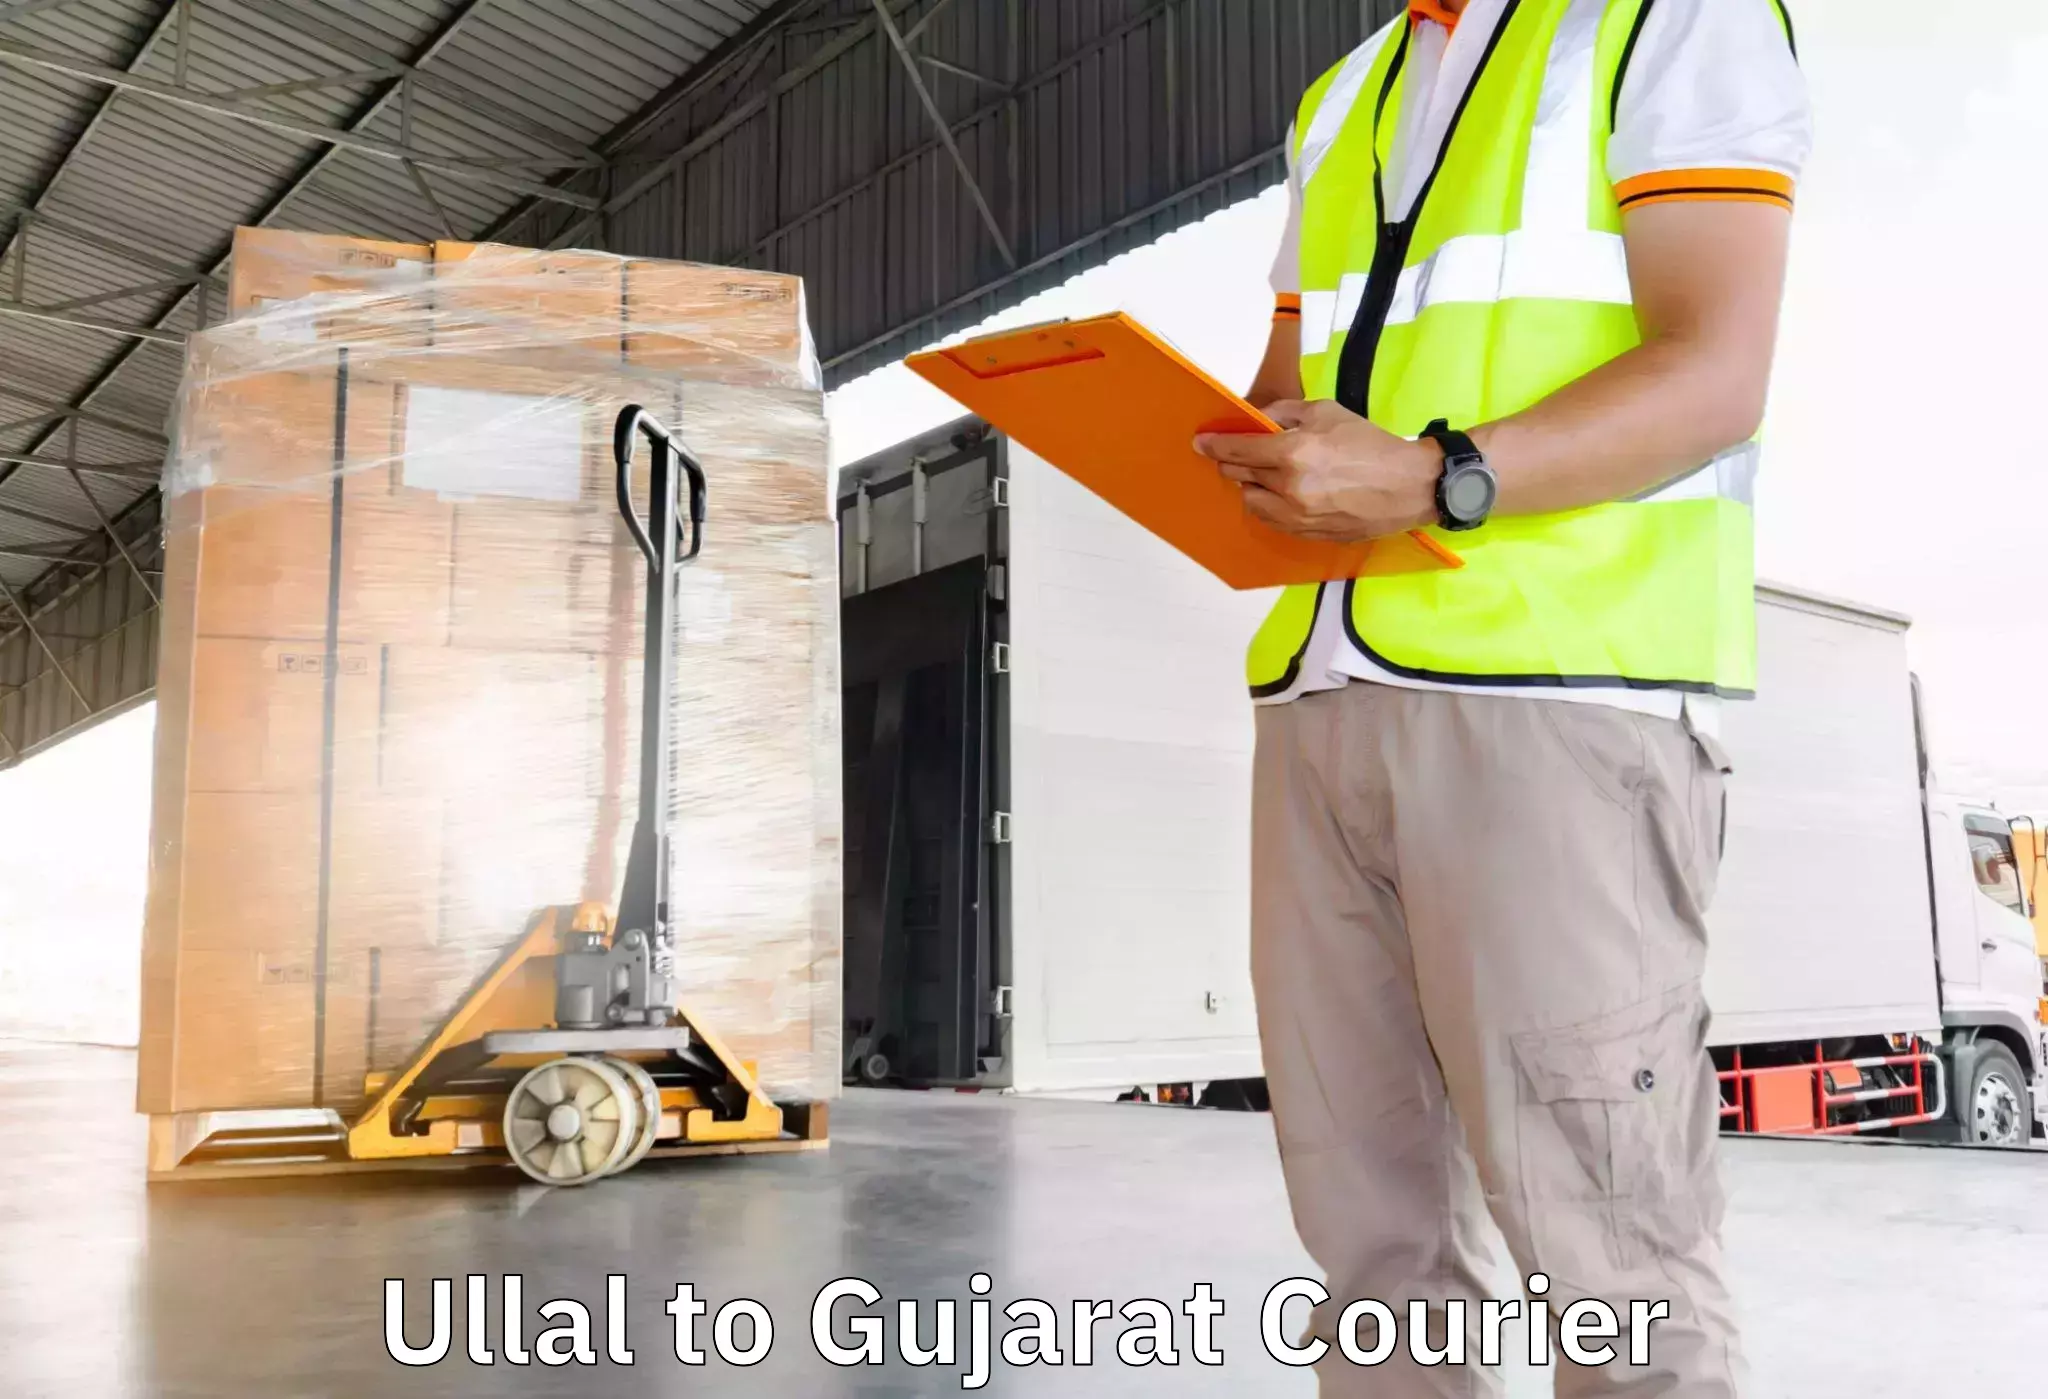 Trusted moving company Ullal to Gujarat